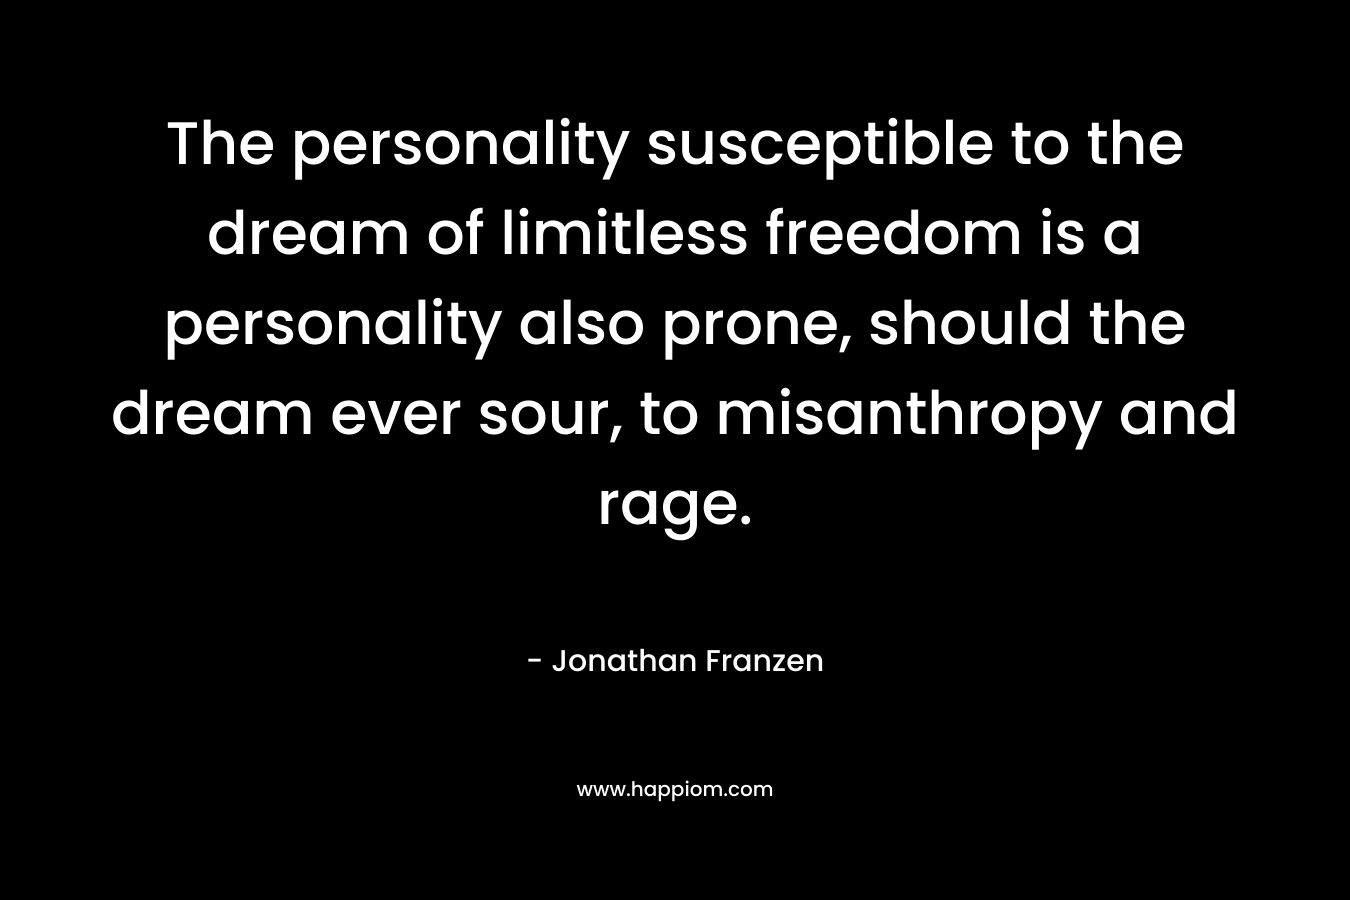 The personality susceptible to the dream of limitless freedom is a personality also prone, should the dream ever sour, to misanthropy and rage.